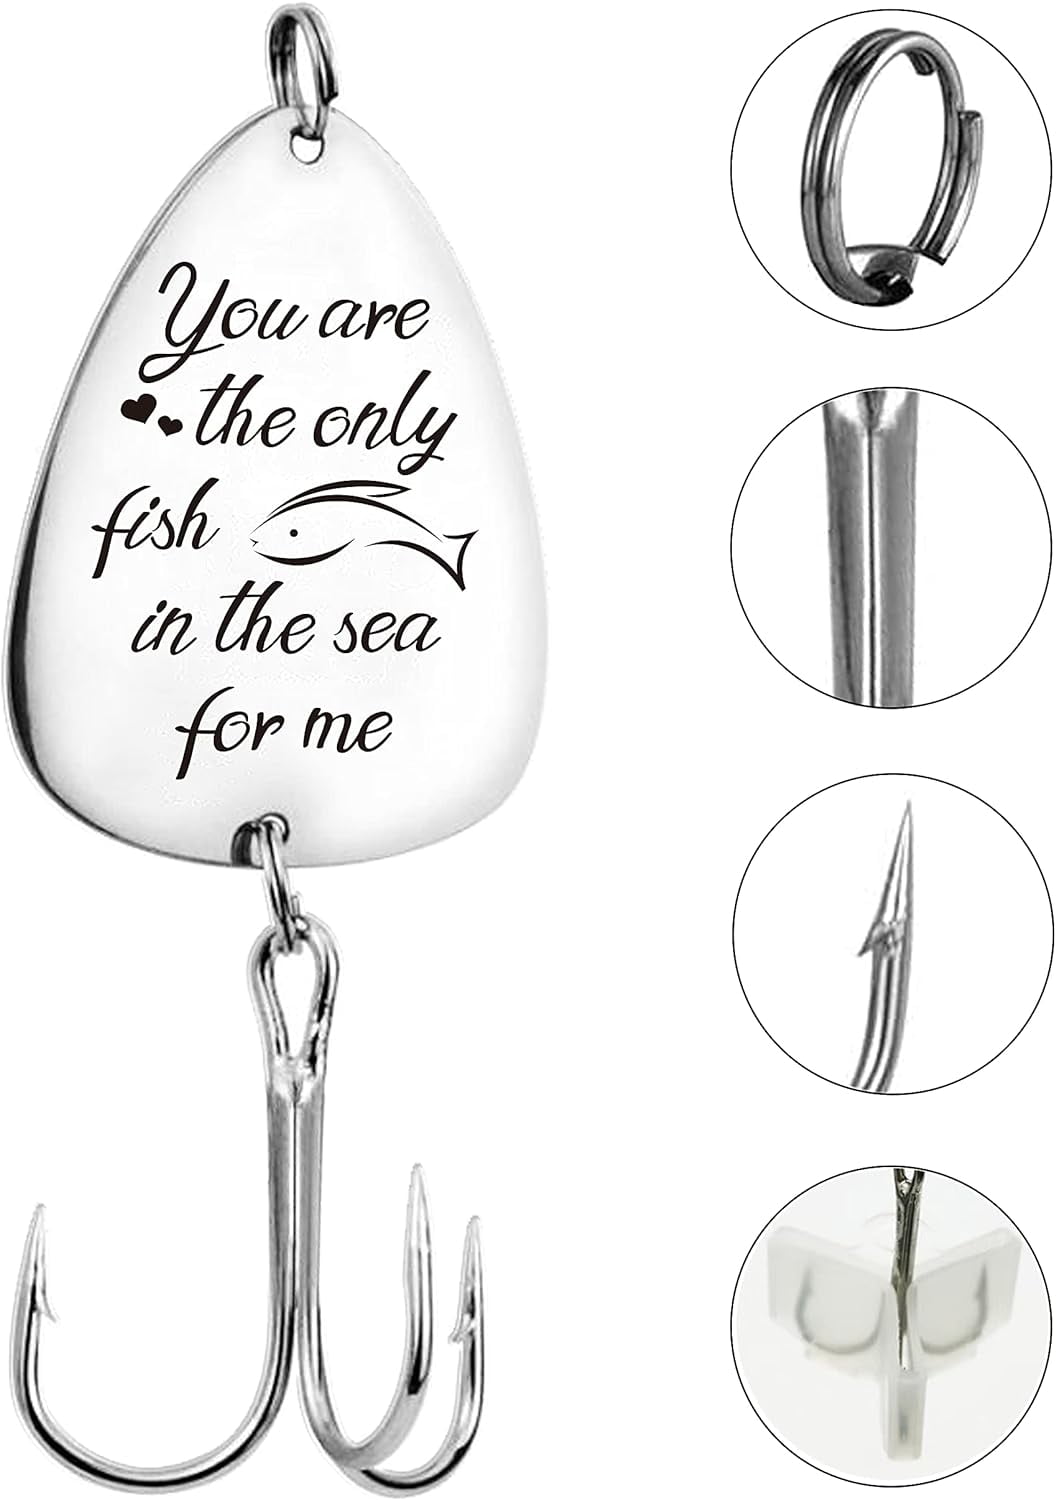 You are The Greatest Catch of My Life Fishing Lure Hook Gift